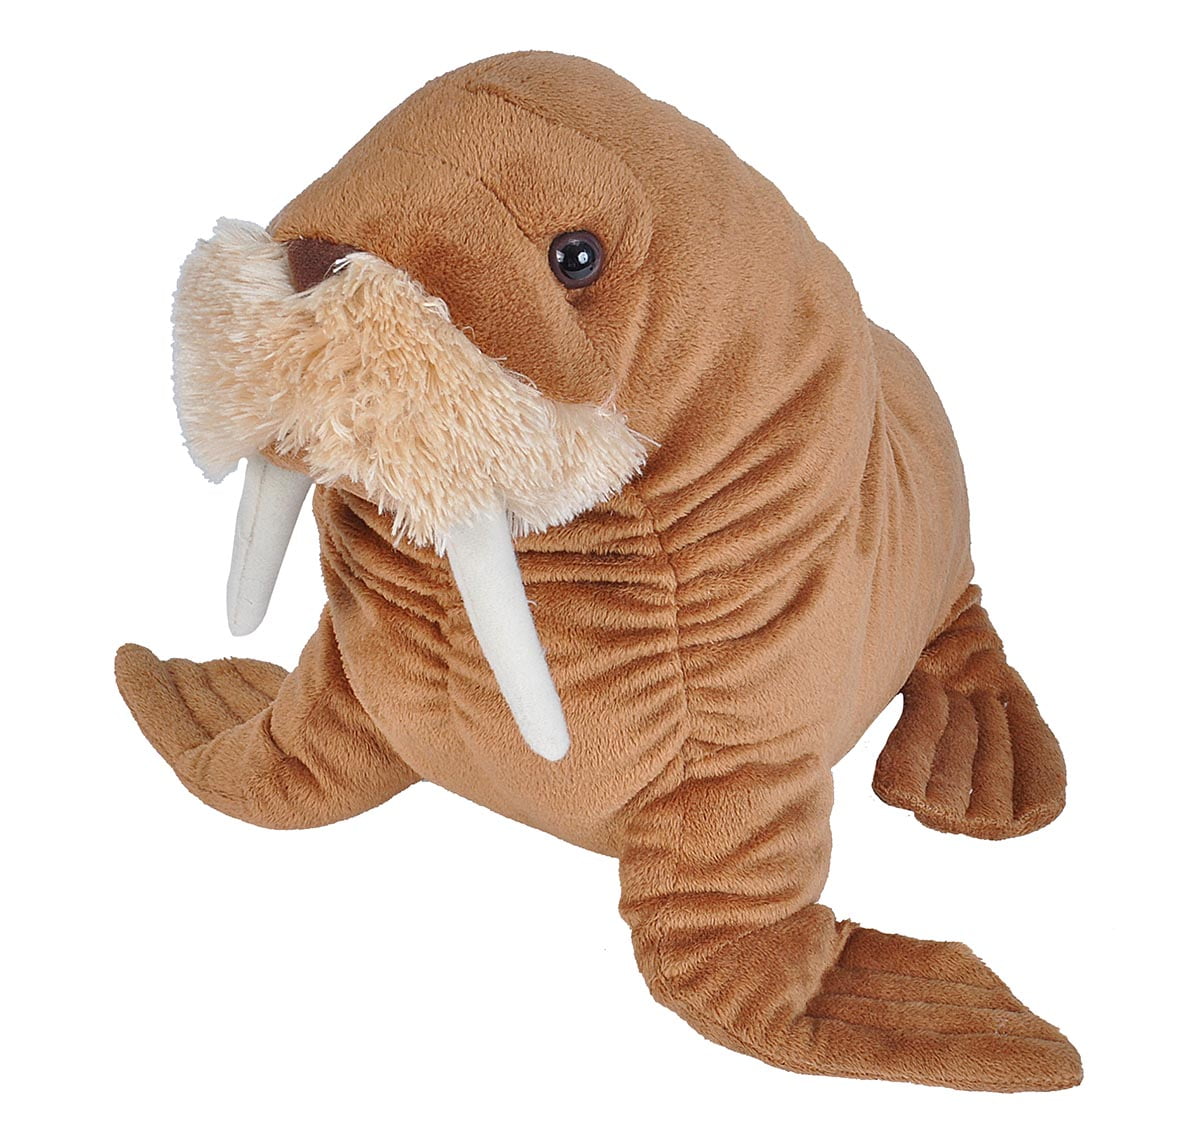 16" GUND Plush Wallace The Walrus Stuffed Animal Wlidlife Realistic Zoo 3 for sale online 